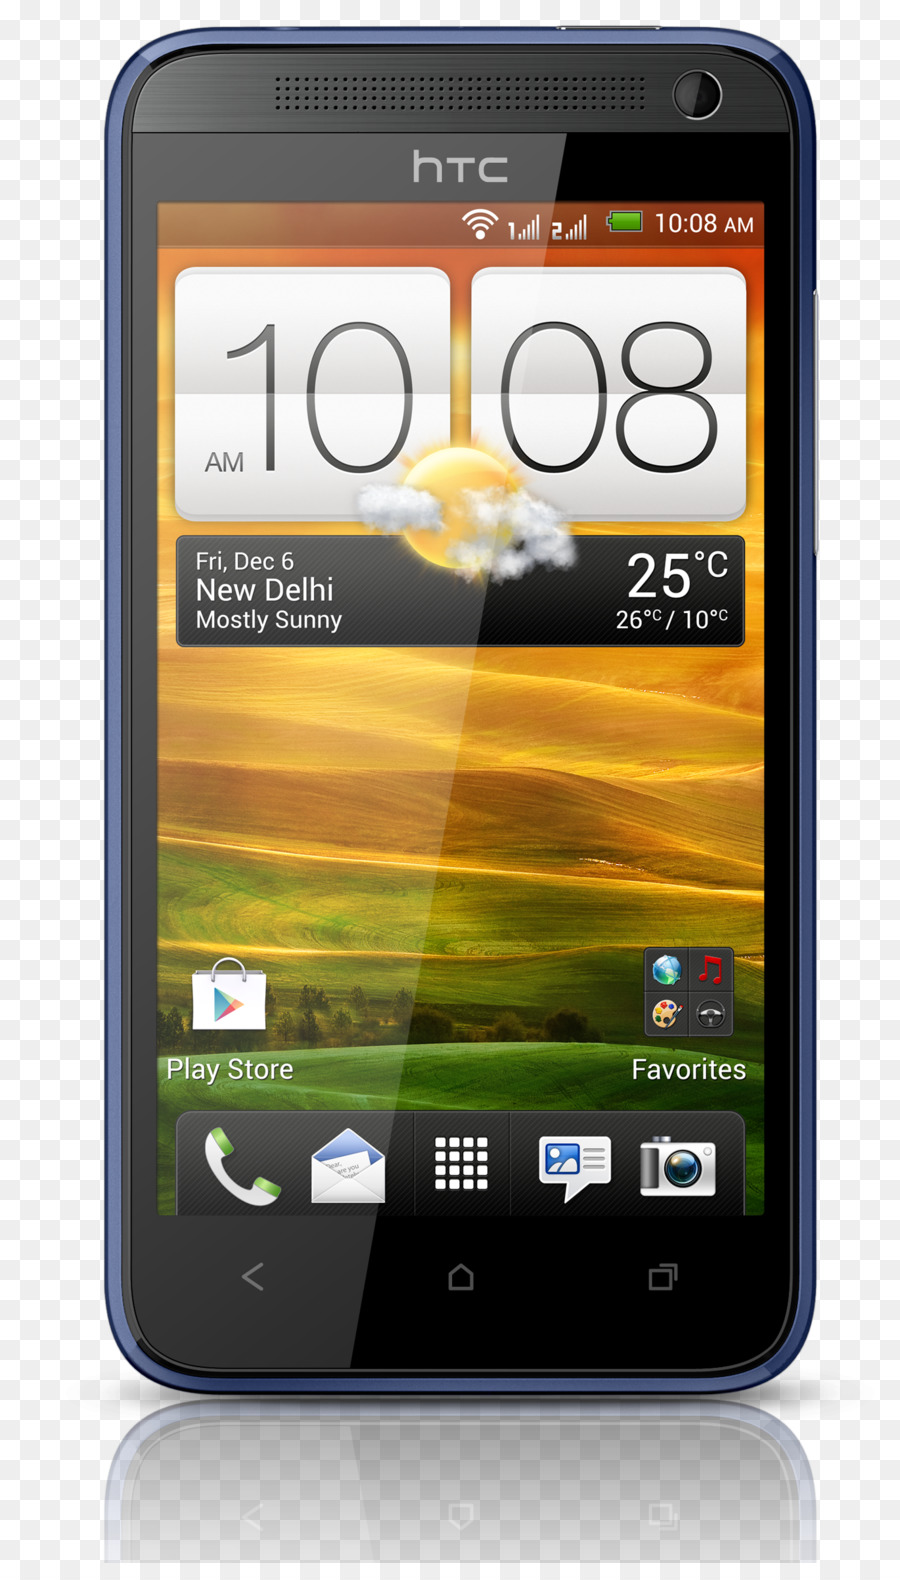 Htc Desire，Htc PNG